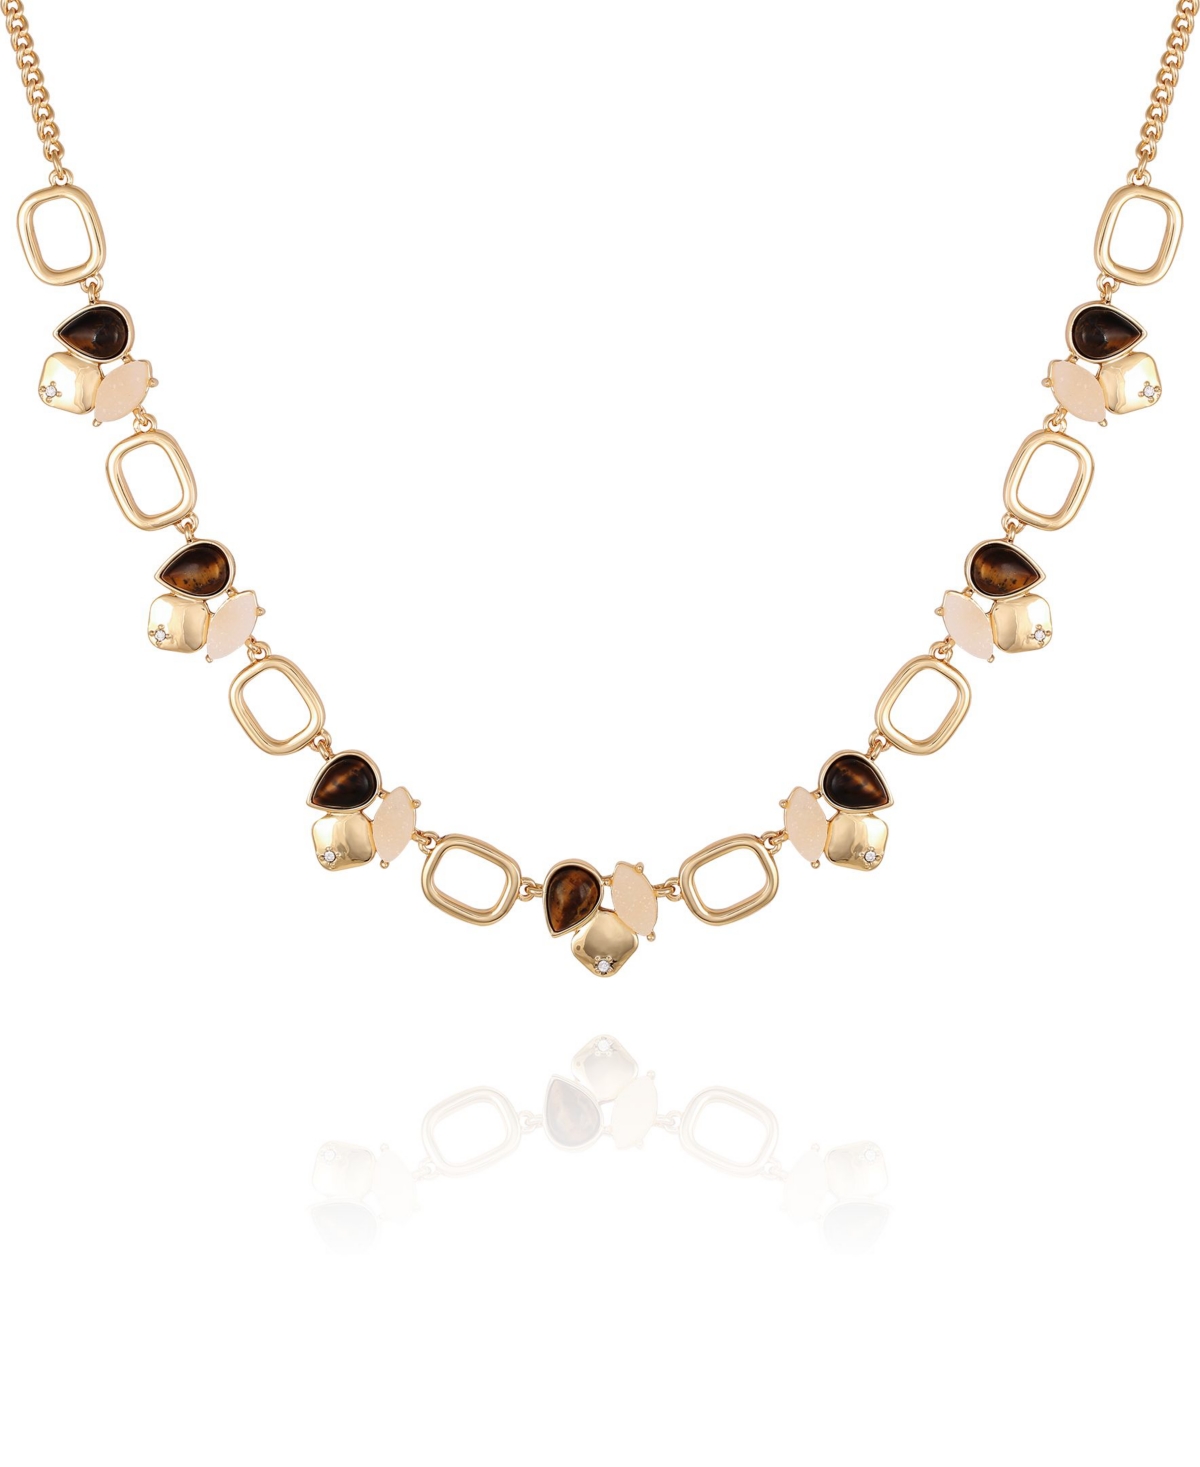 Perfectly Natural Statement Necklace - Gold-Tone